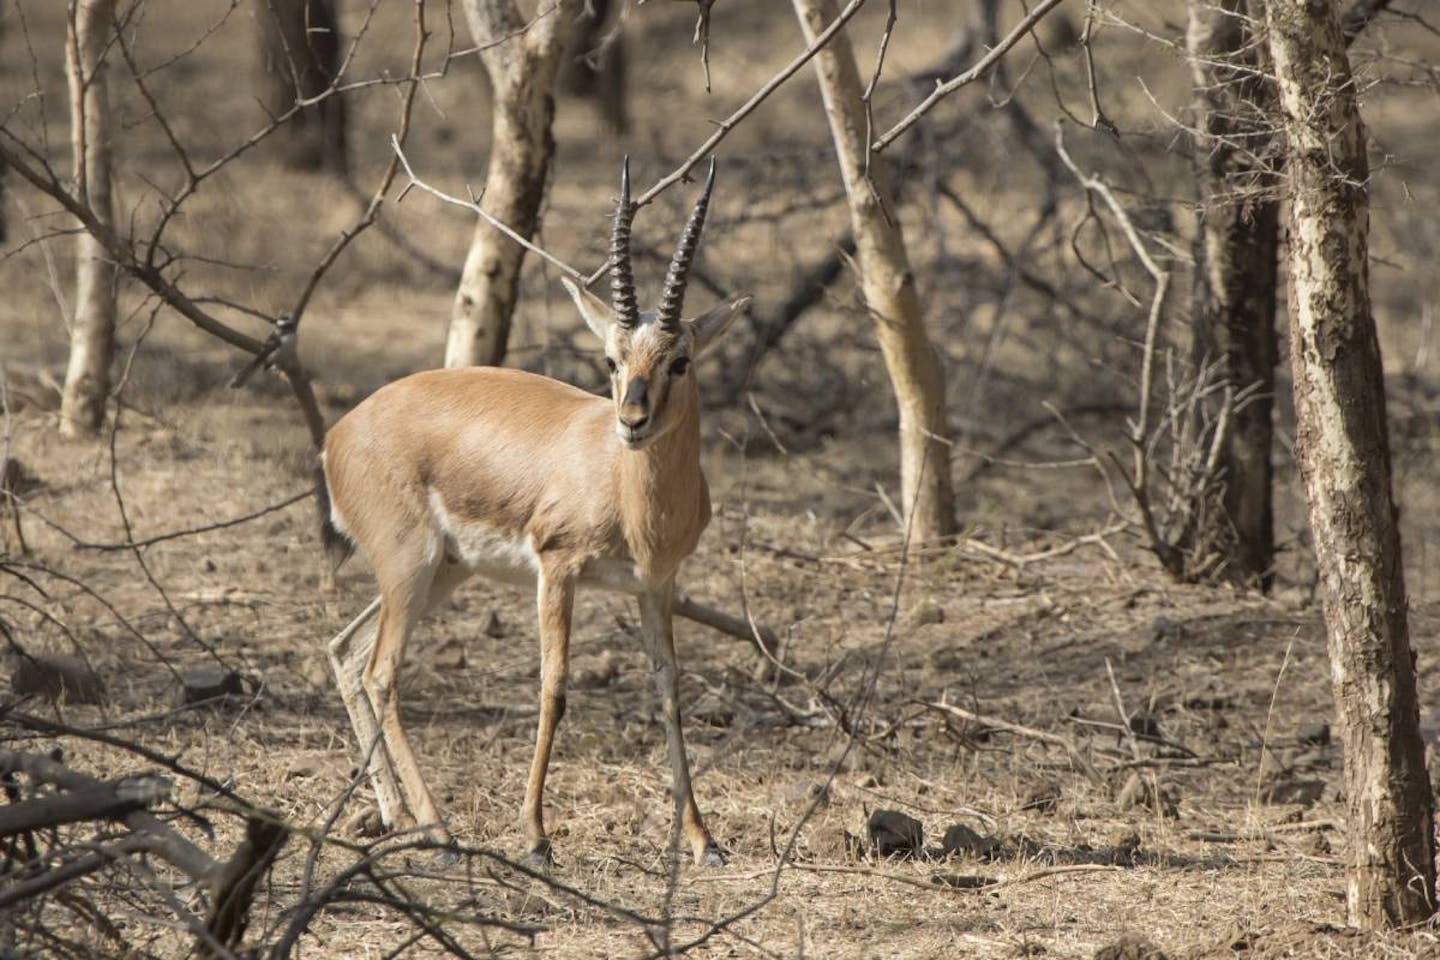 Indian gazelle: a charming species native to the Iranian desert